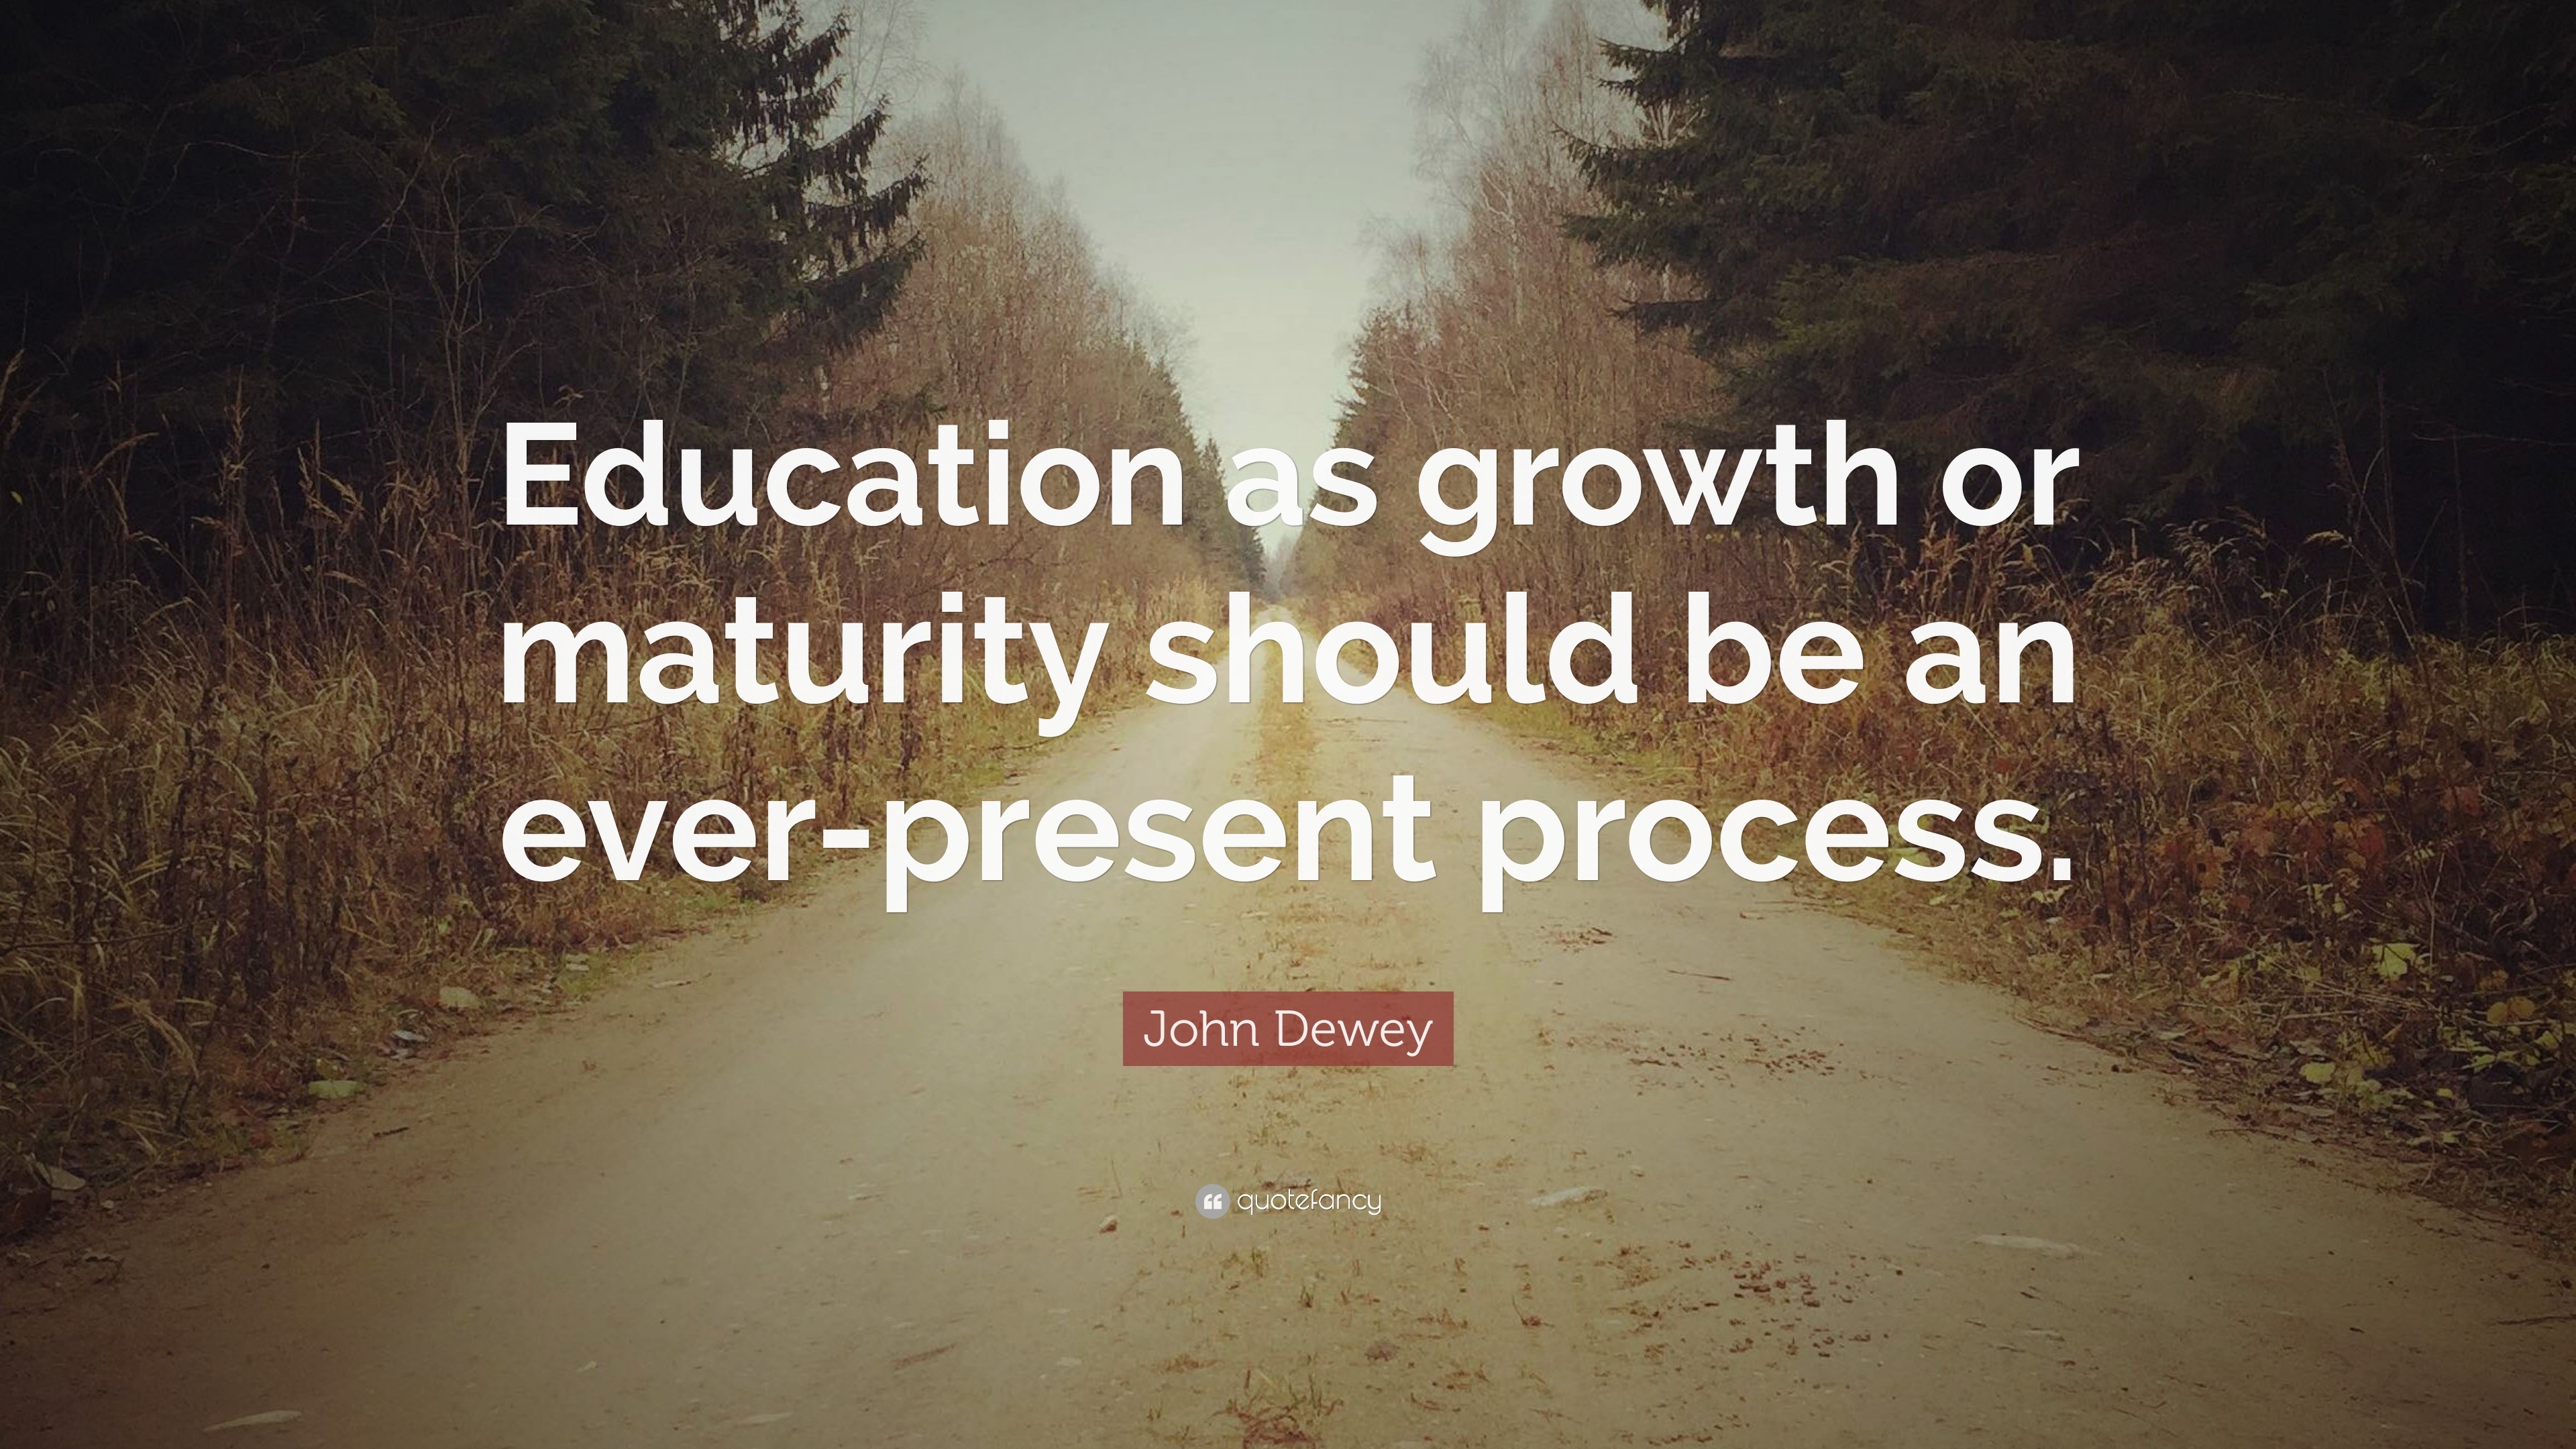 John Dewey Quote: “Education as growth or maturity should be an ever ...